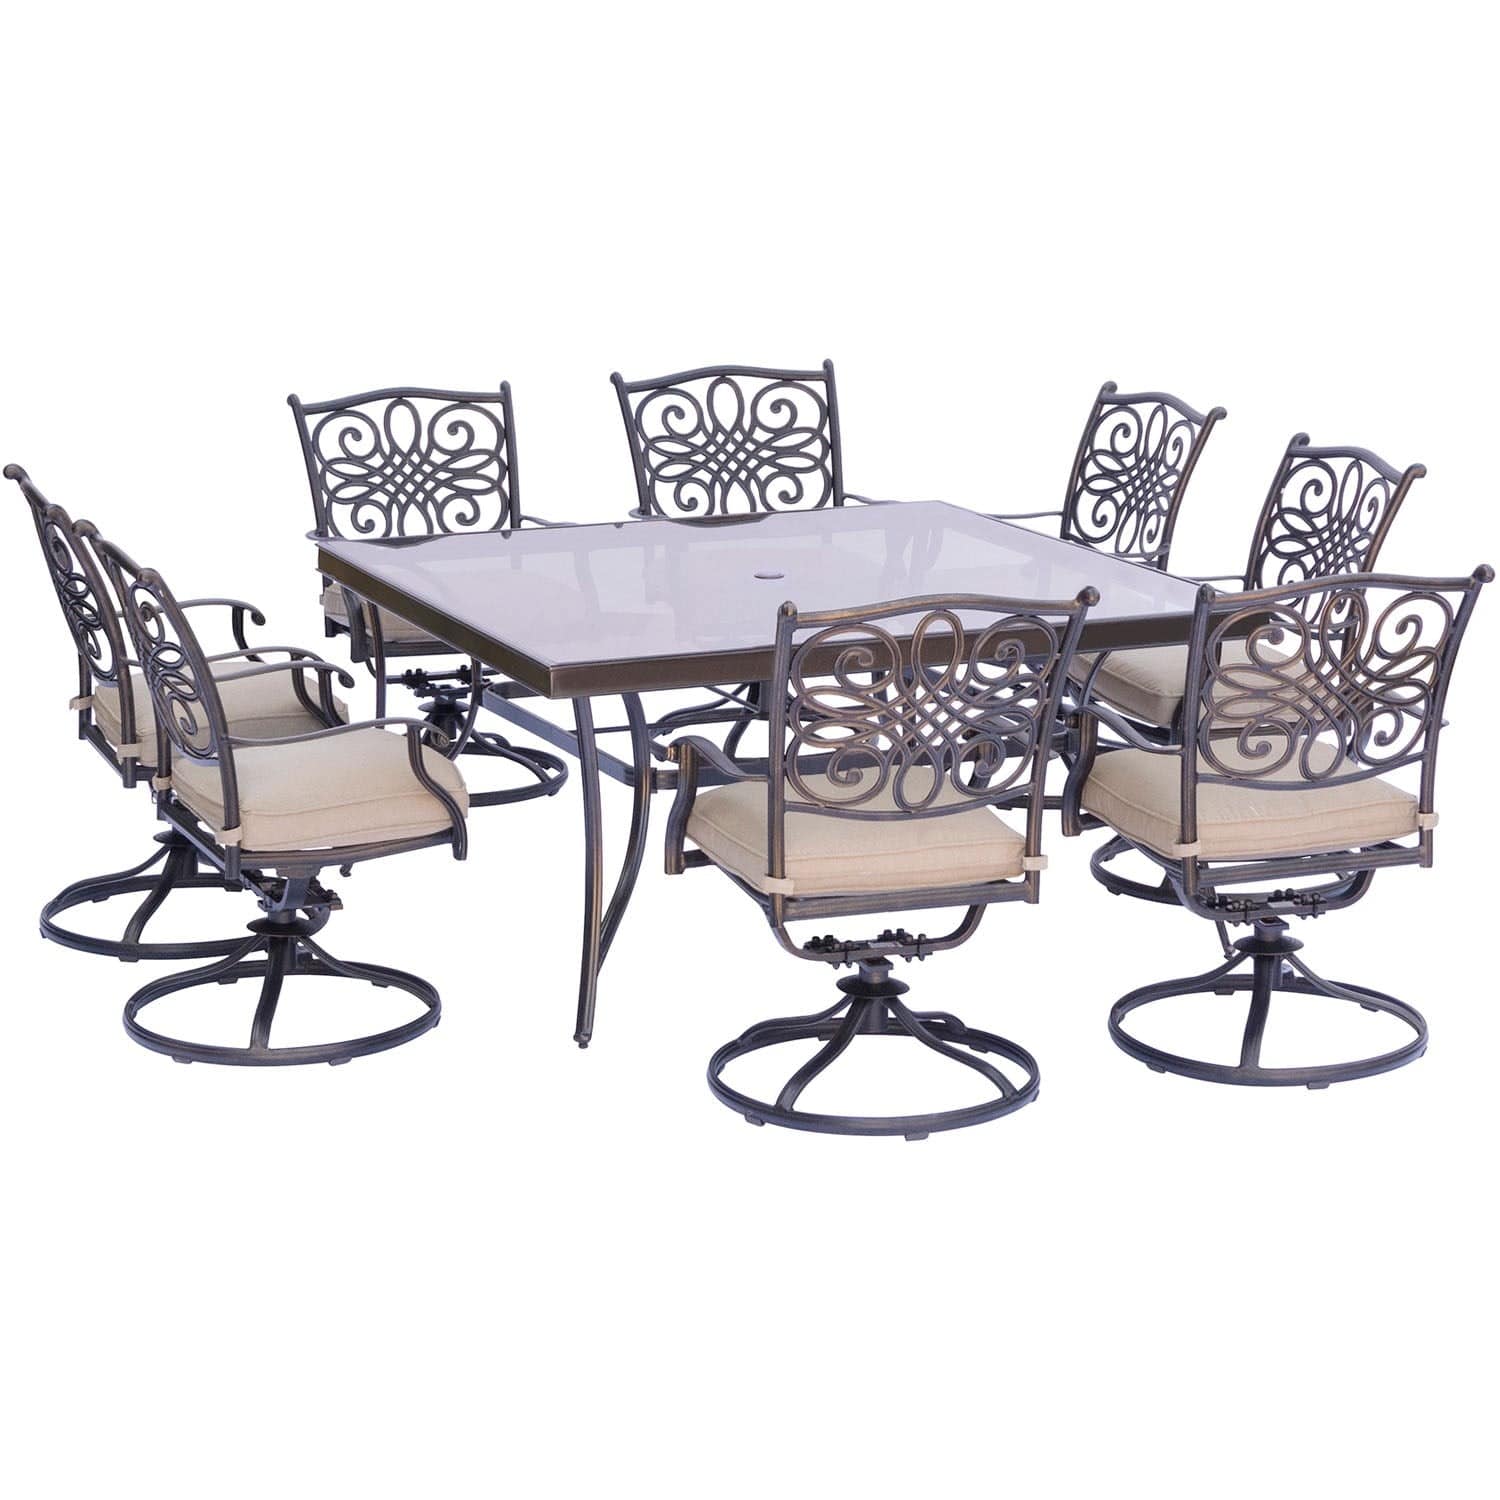 Hanover Outdoor Dining Set Hanover - Traditions 9-Piece  Aluminium Frame Dining Set in Tan with a 60 In. Square Glass-Top Dining Table | TRADDN9PCSWSQG